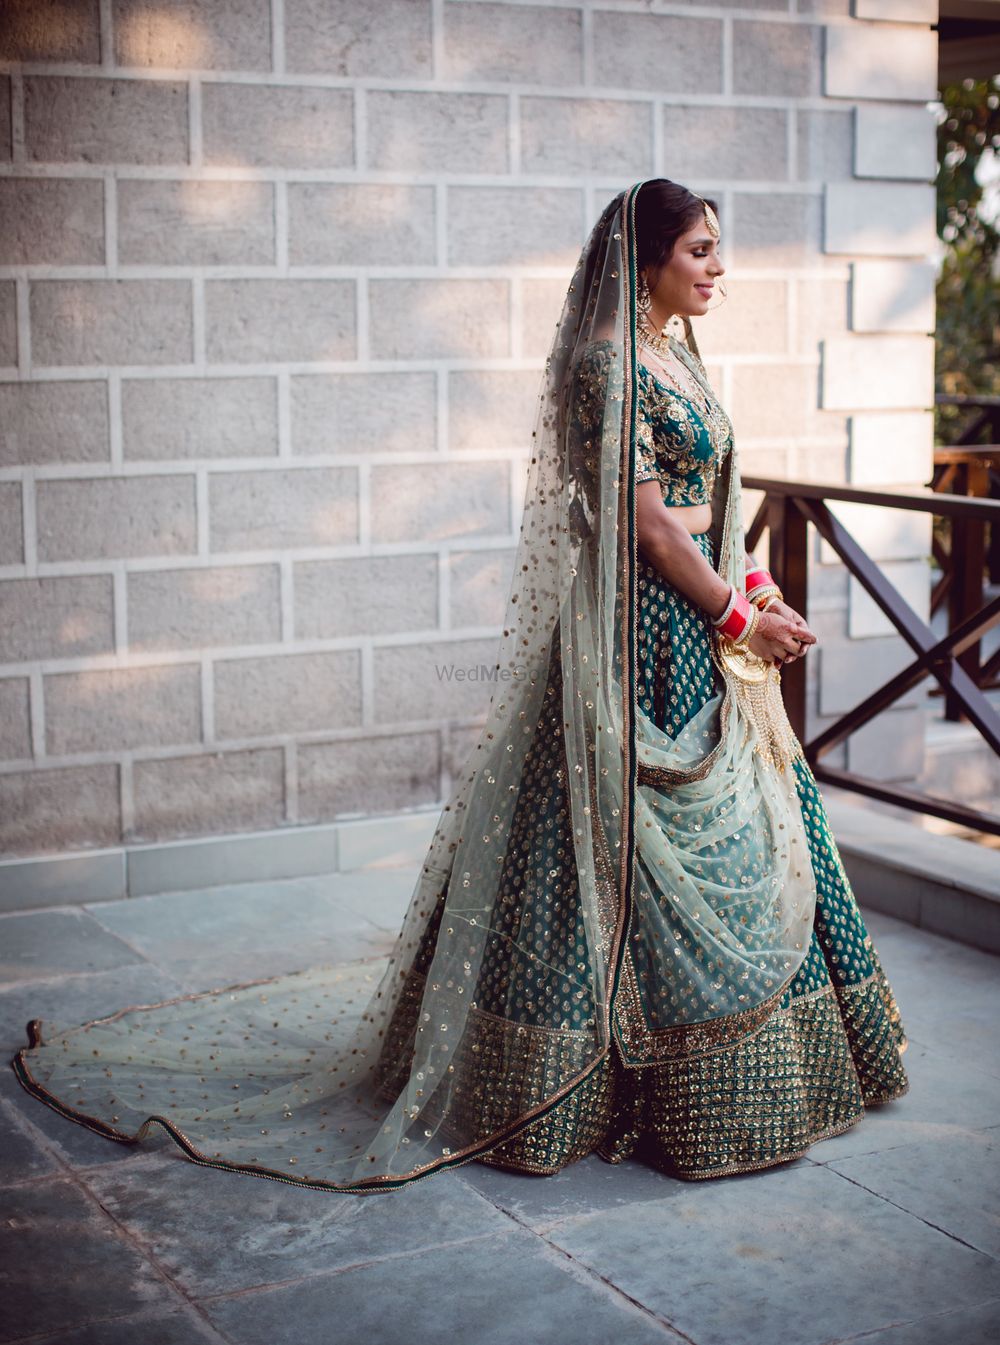 Photo of A bride in a green lehenga with a contrasting dupatta